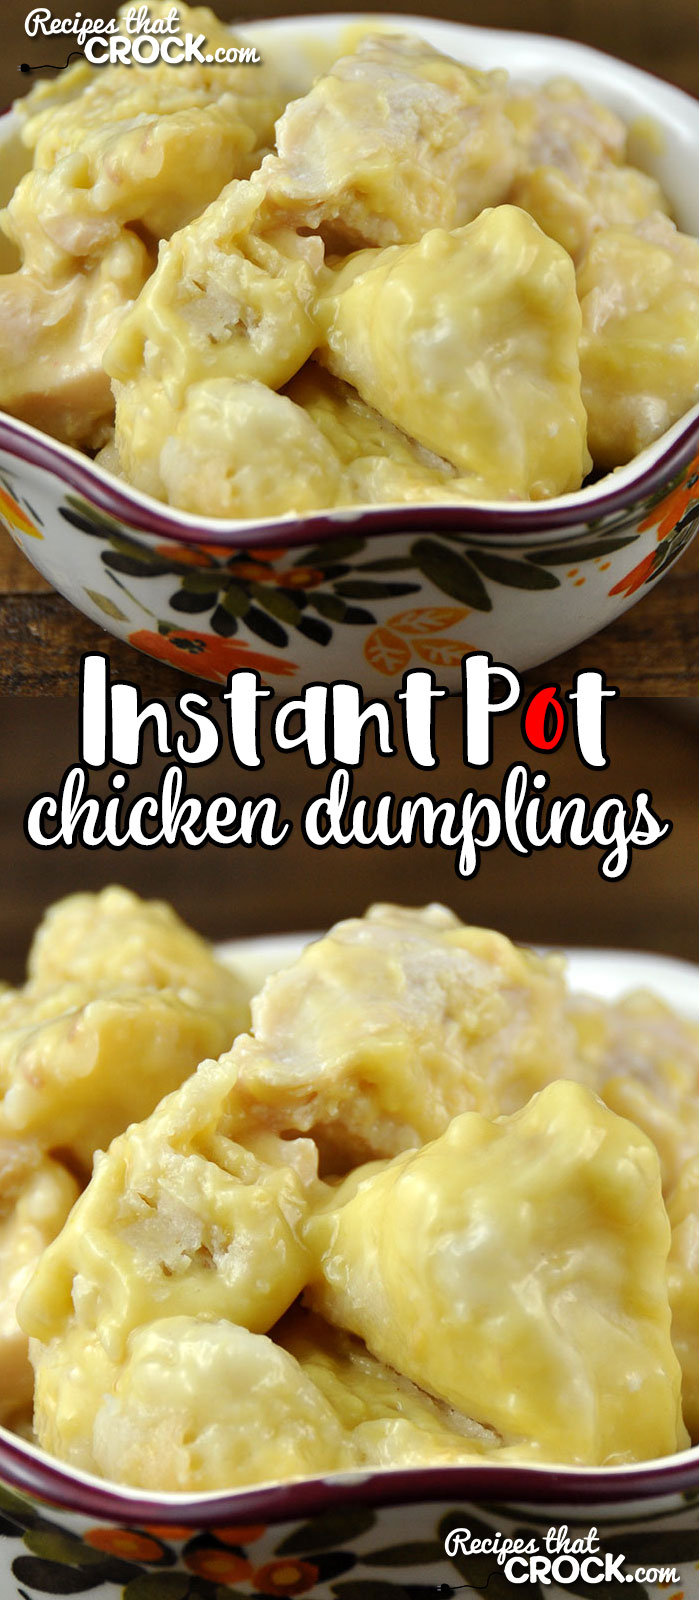 My dear readers, I have an awesome treat for you today! With this Instant Pot Chicken Dumplings recipe, you can have delicious chicken dumplings in a half hour flat! 